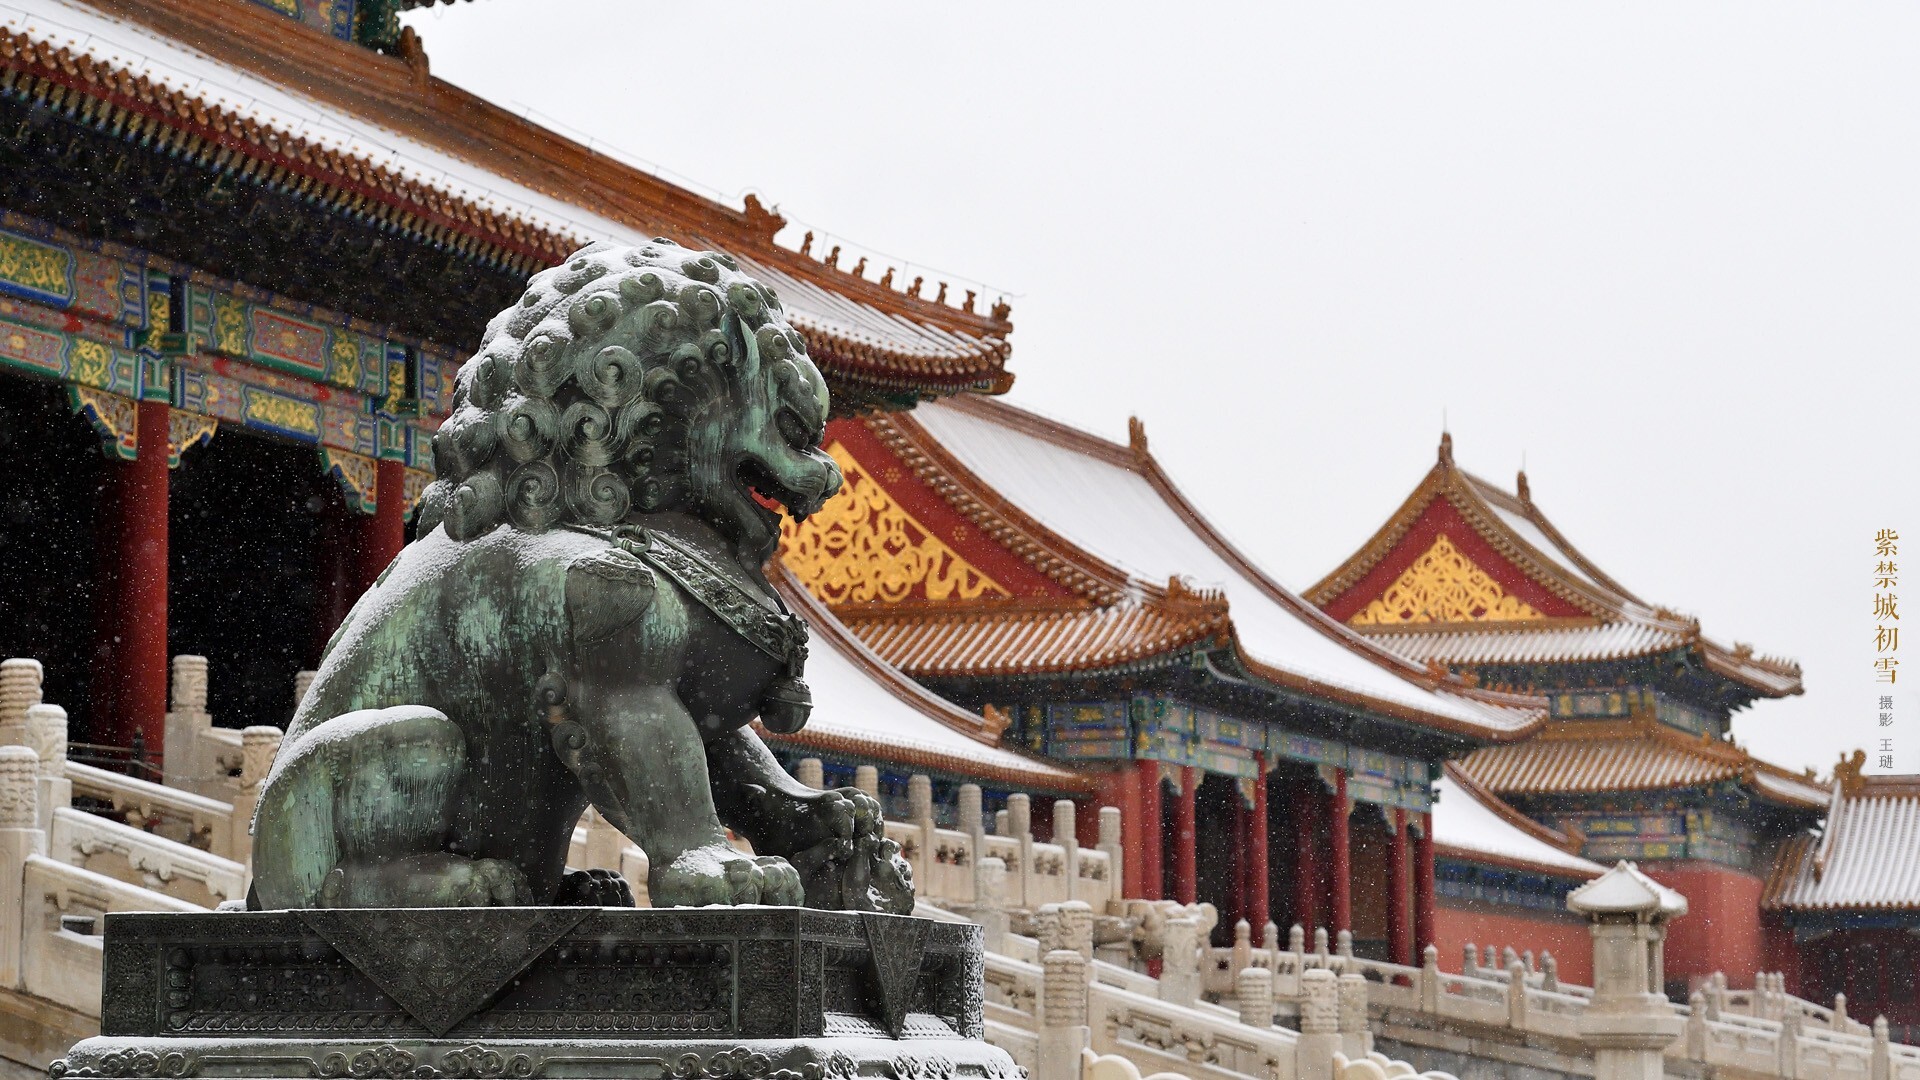 10 Facts About the Forbidden City - Have Fun With History